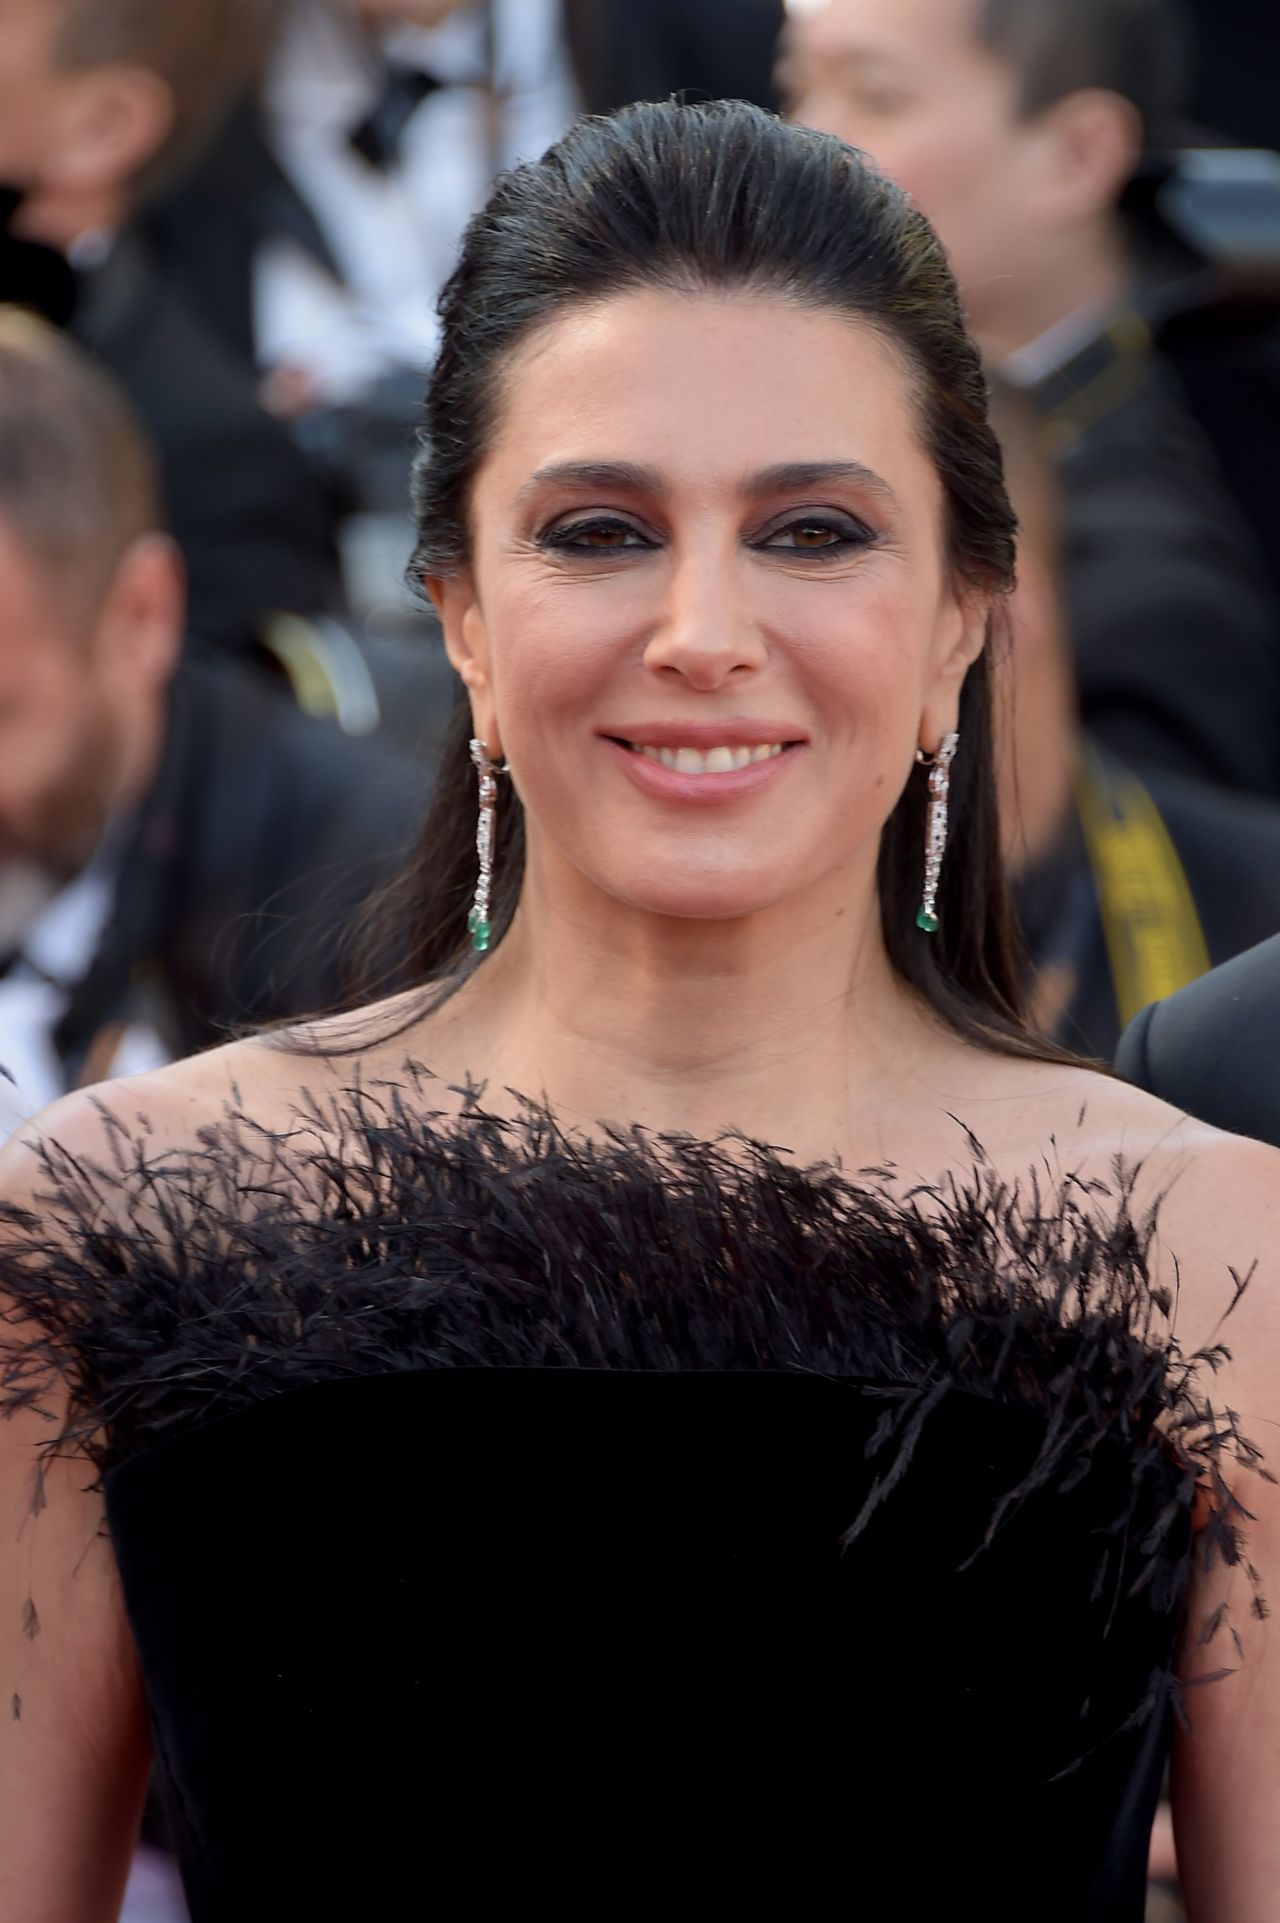 NADINE LABAKI AT LES MISERABLES RED CARPET 72ND ANNUAL CANNES FILM FESTIVAL8